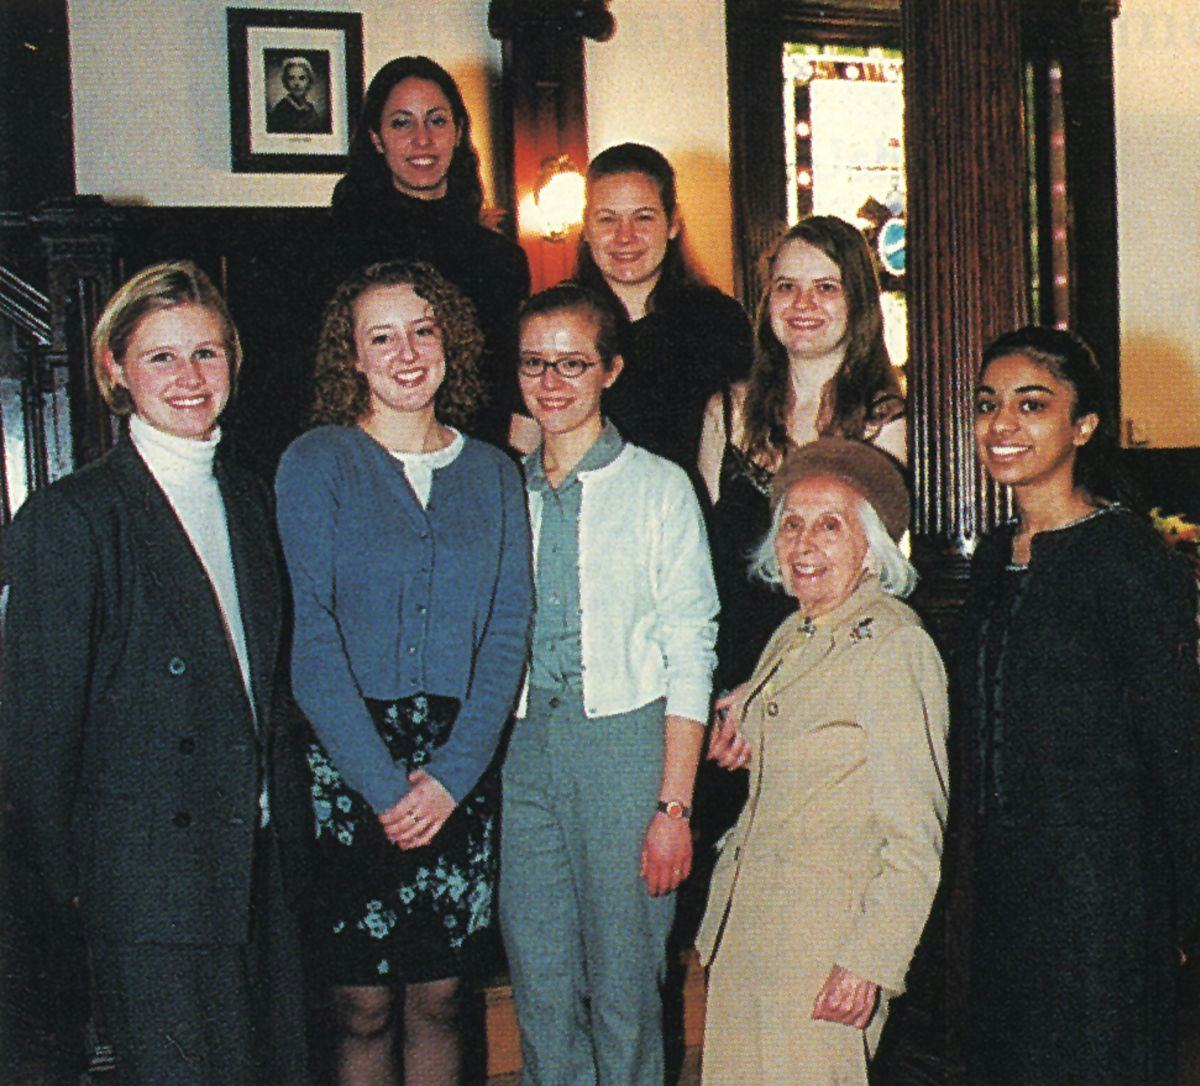 Lore E. Feiler with students in Lore-El Center for Women’s Leadership